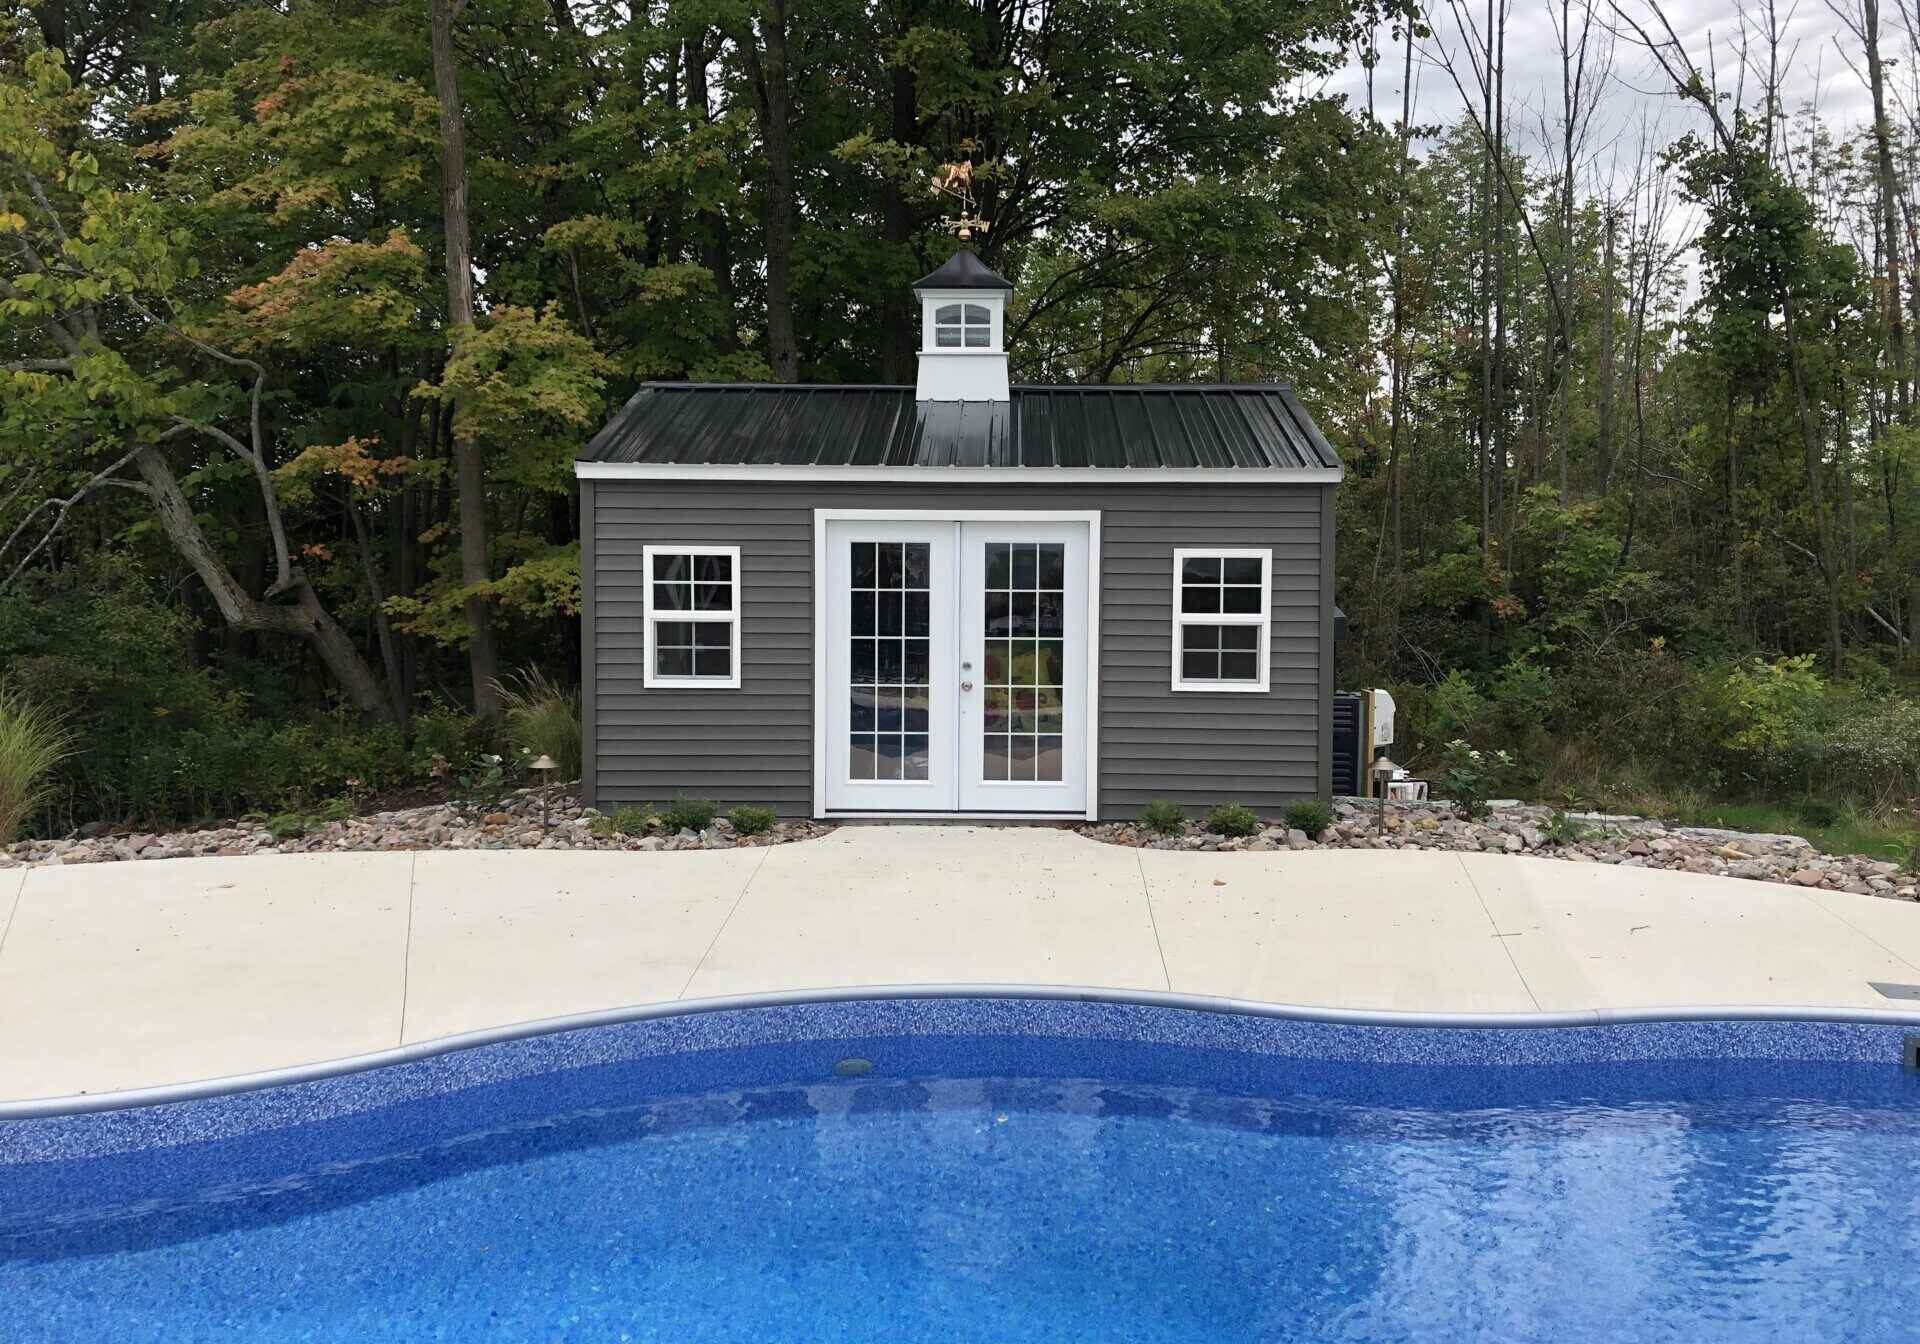 A pool house with a door open and a window.